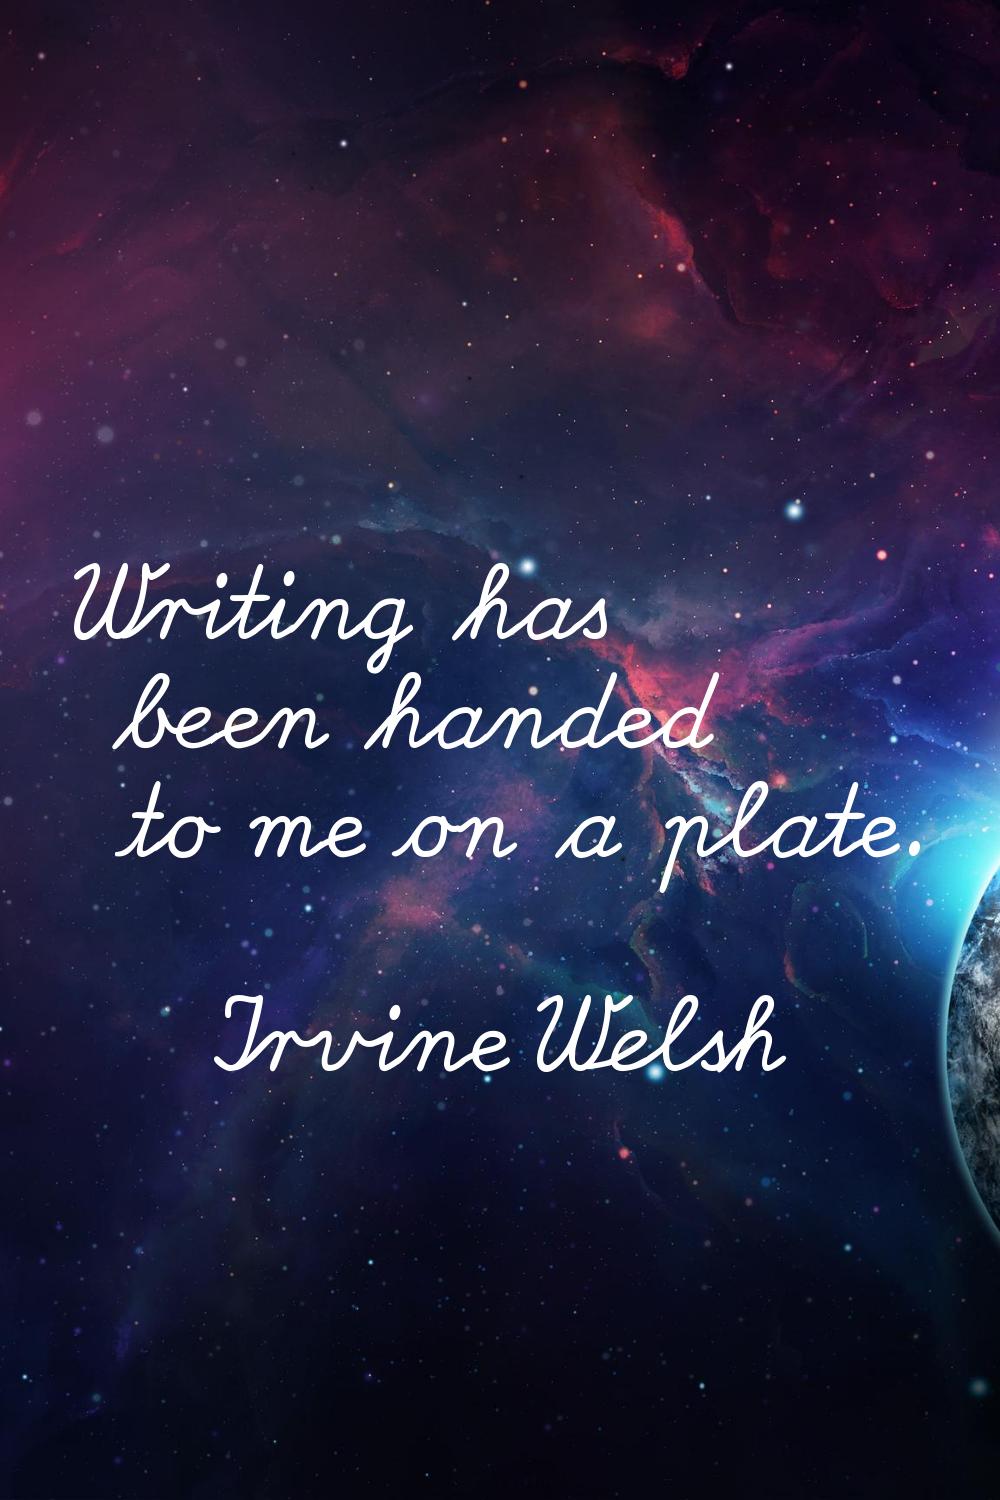 Writing has been handed to me on a plate.